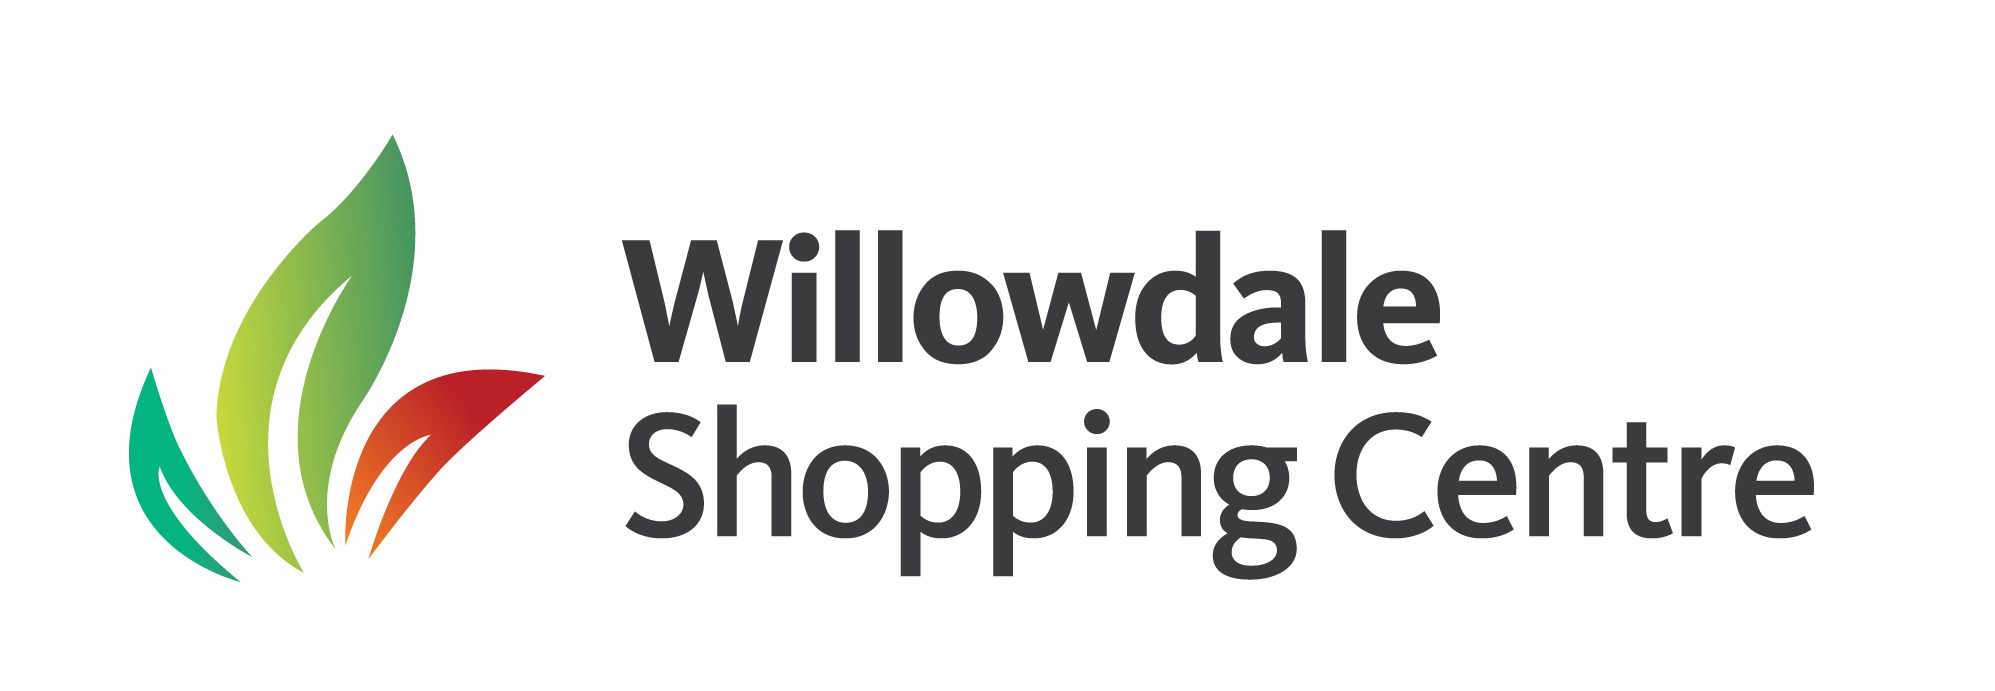 Willowdale Shopping Centre